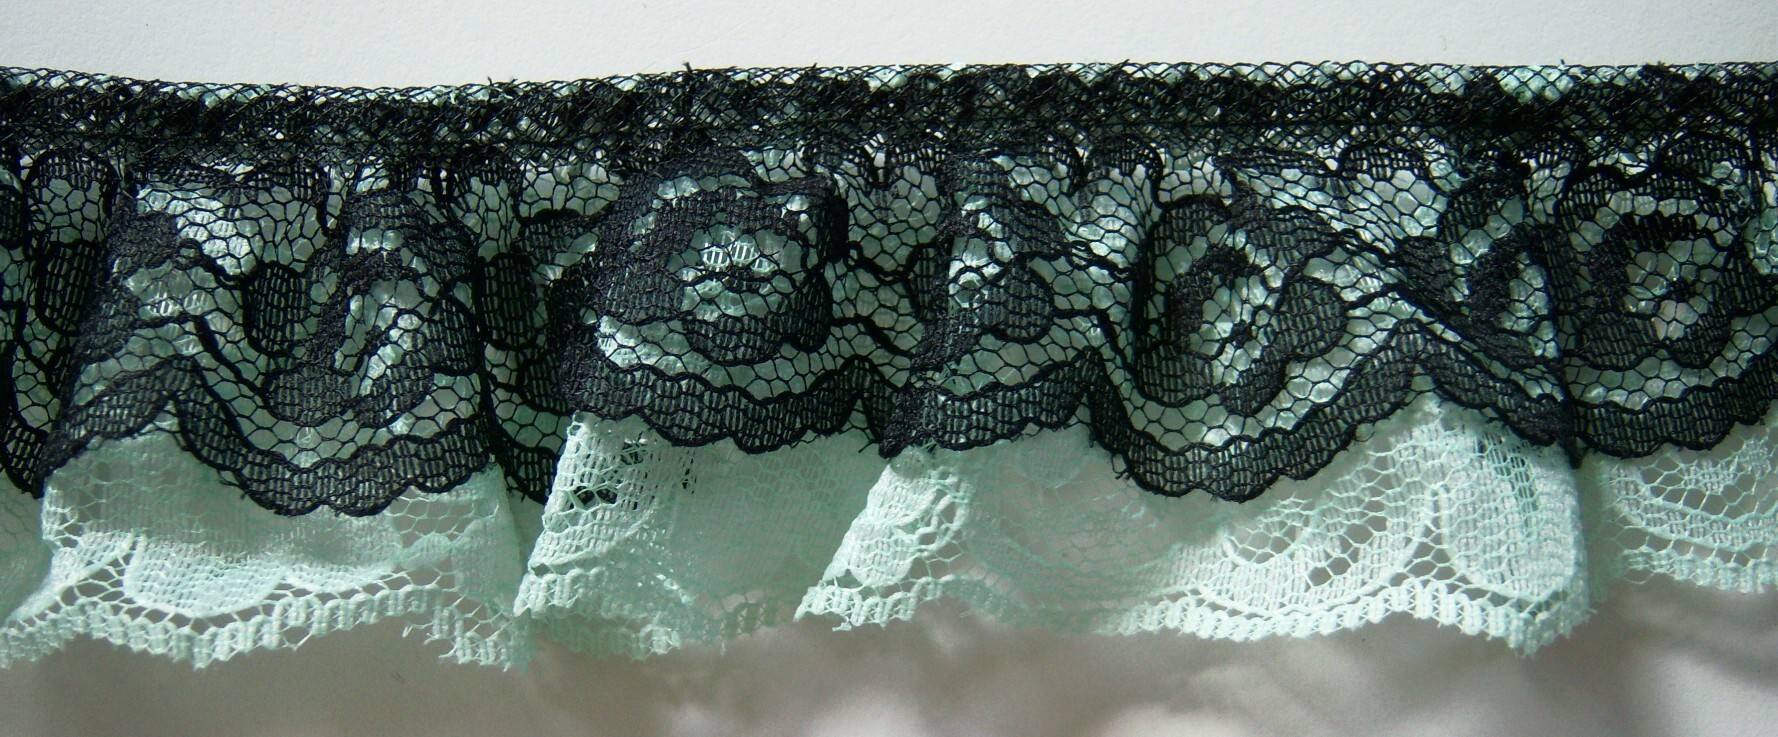 Black/Mint Double Gathered Lace